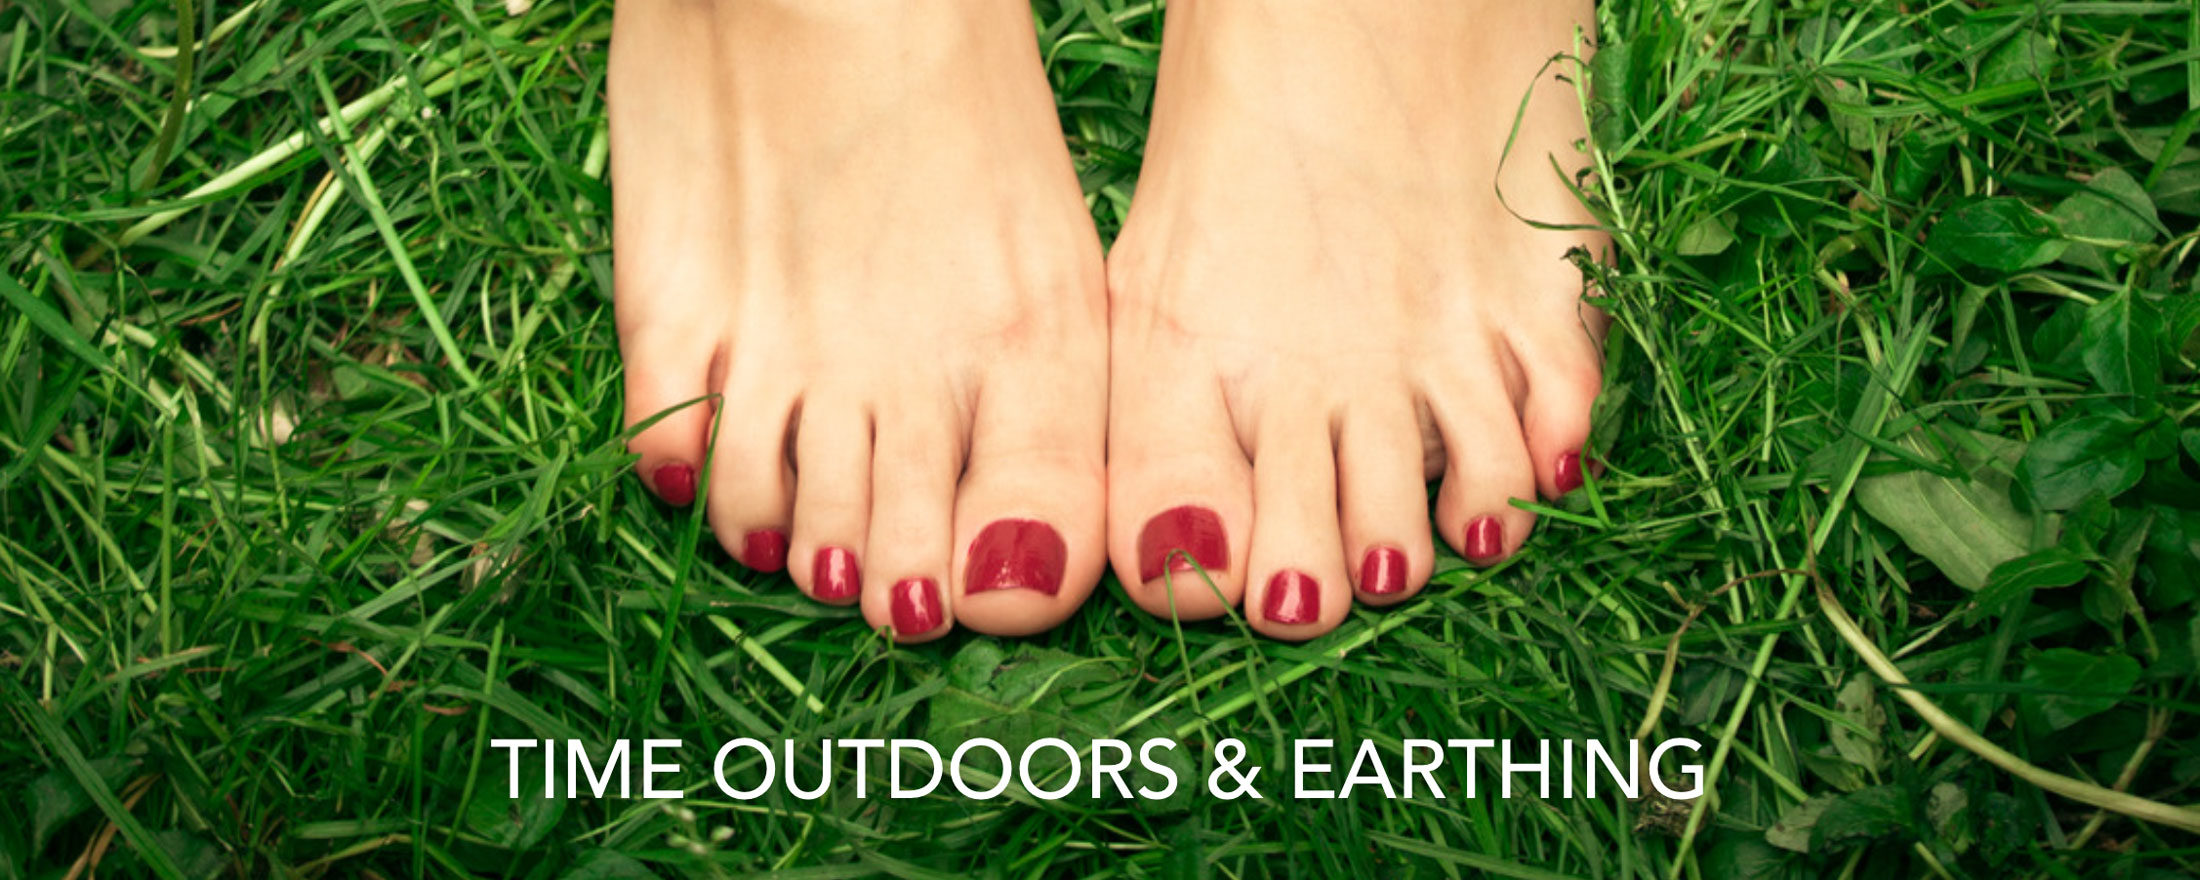 Time Outdoors & Earthing